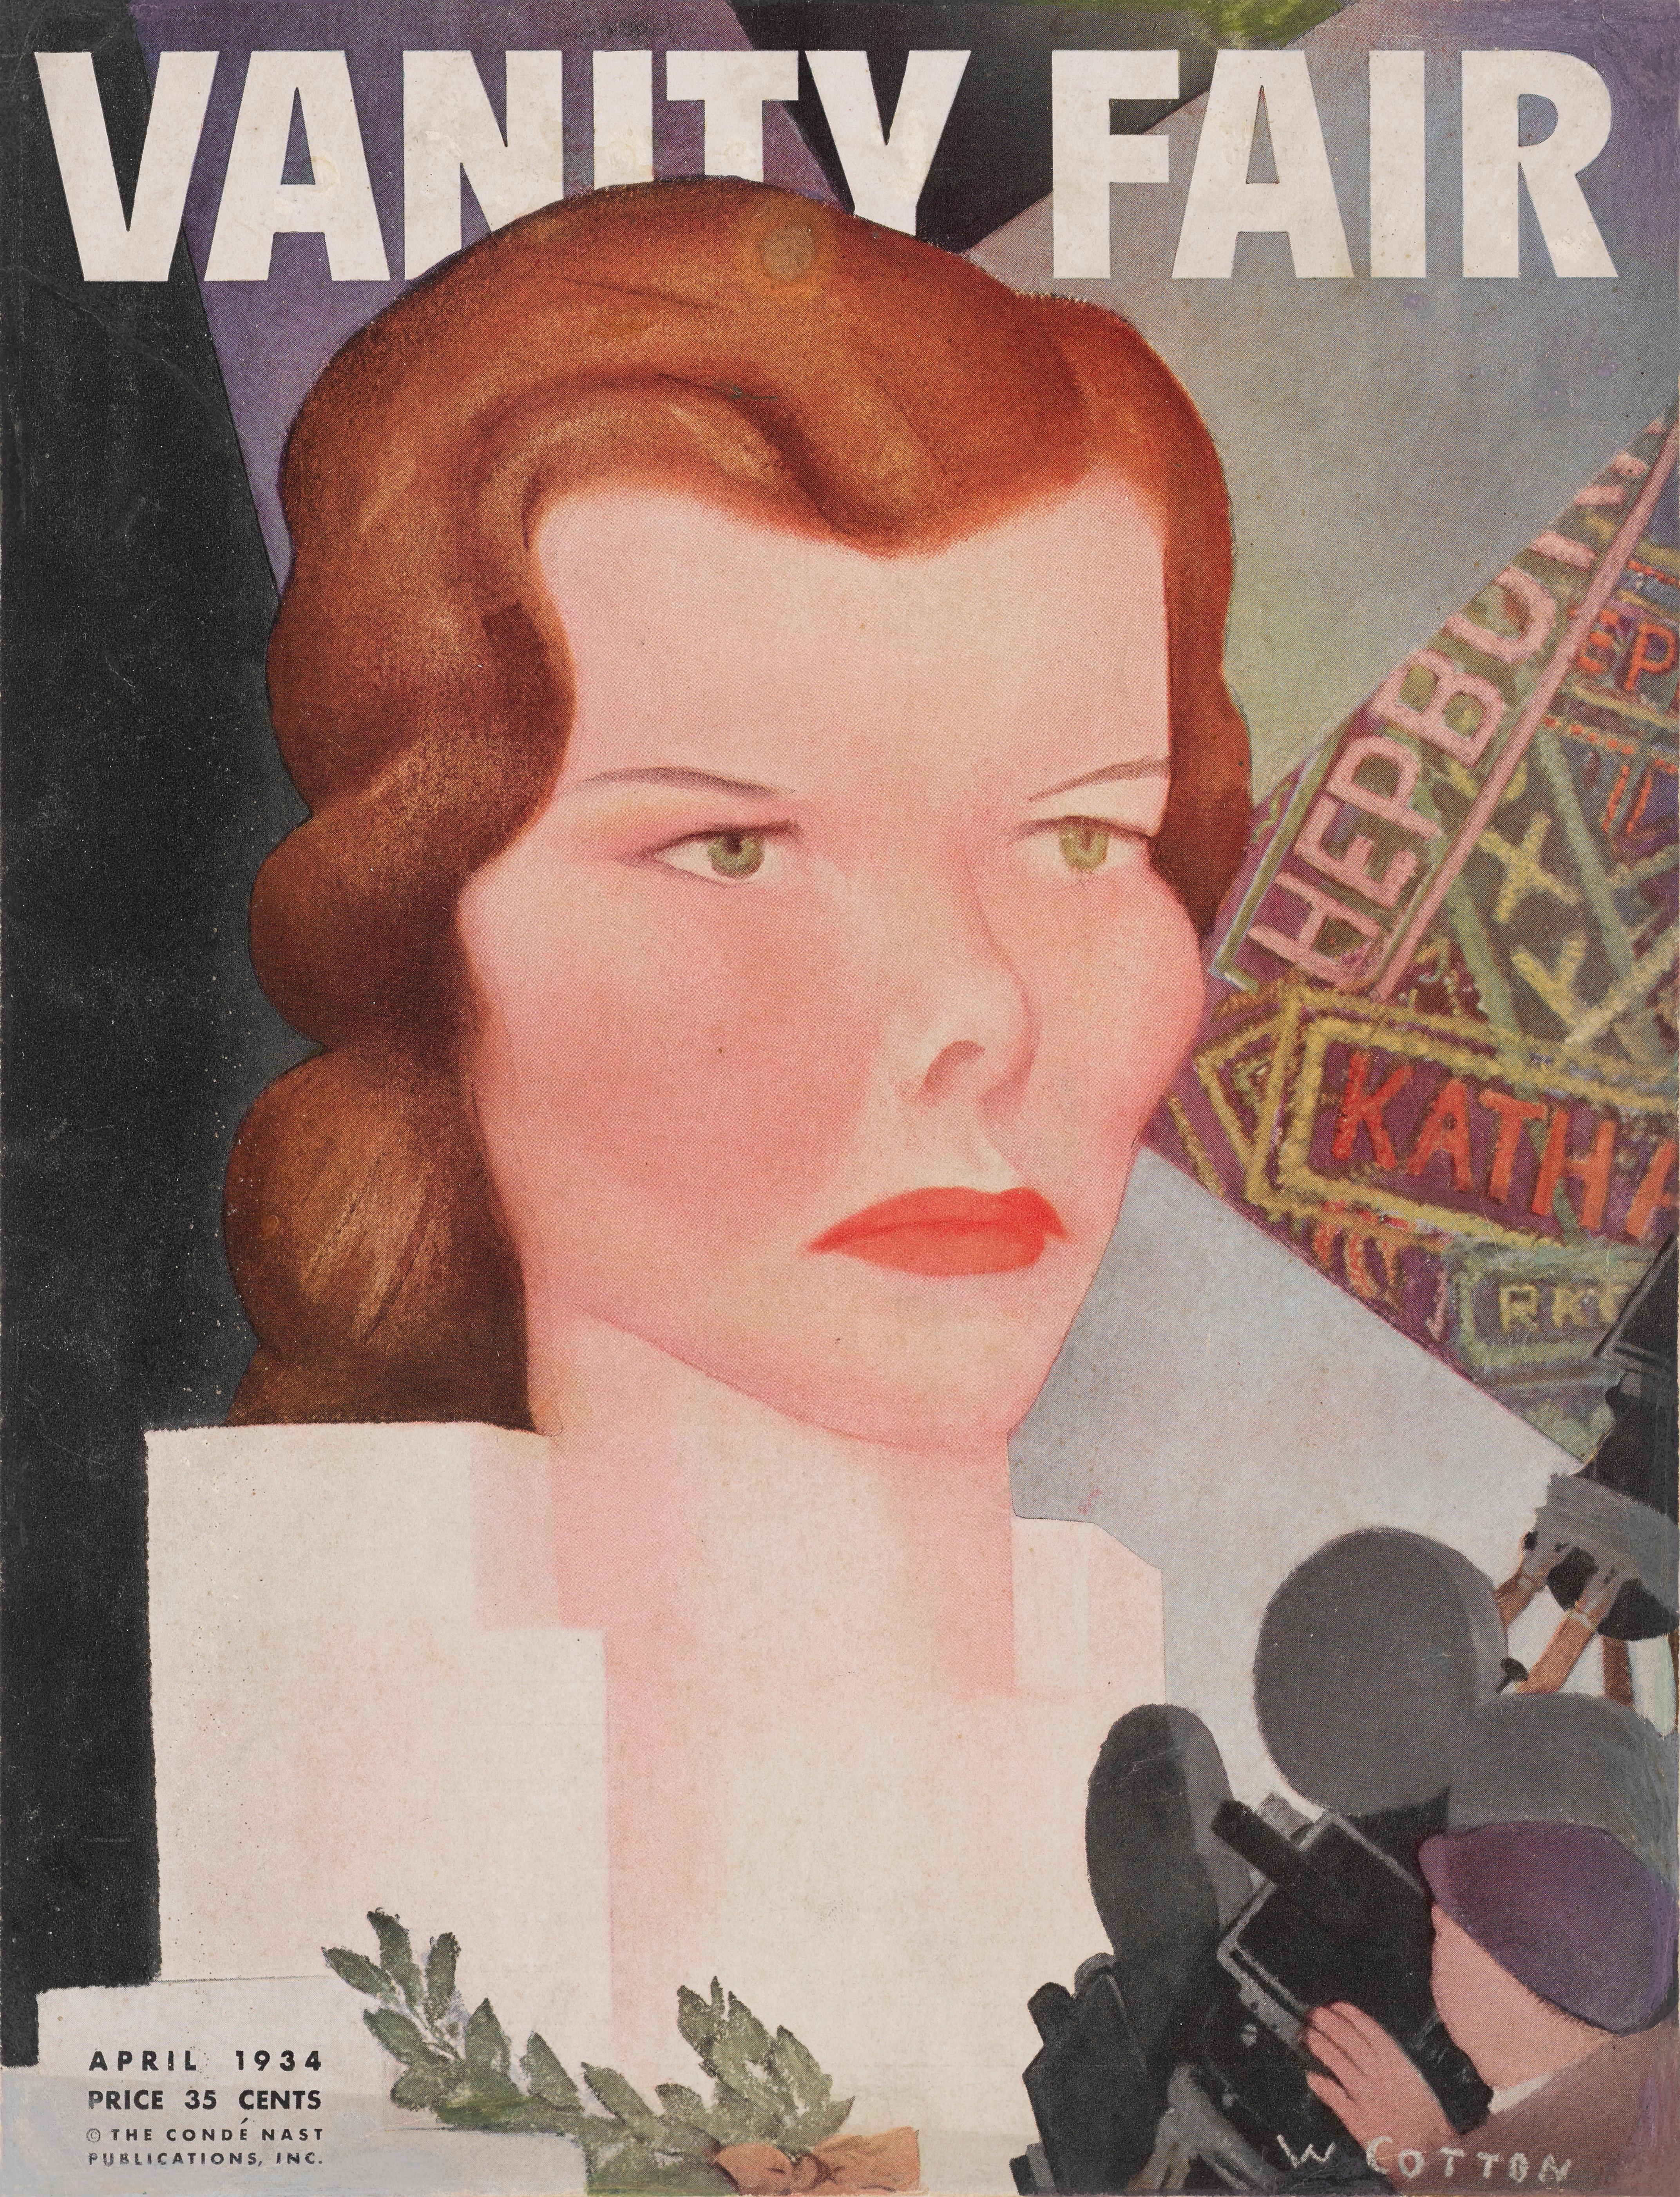 Original cover of Katherine Hepburn for Vanity Fair, April 1934
The artwork on this piece is by American portrait painter, caricaturist, and playwright. William Henry 'Will' cotton (1880-1958)
This piece is conservation paper backed and would be